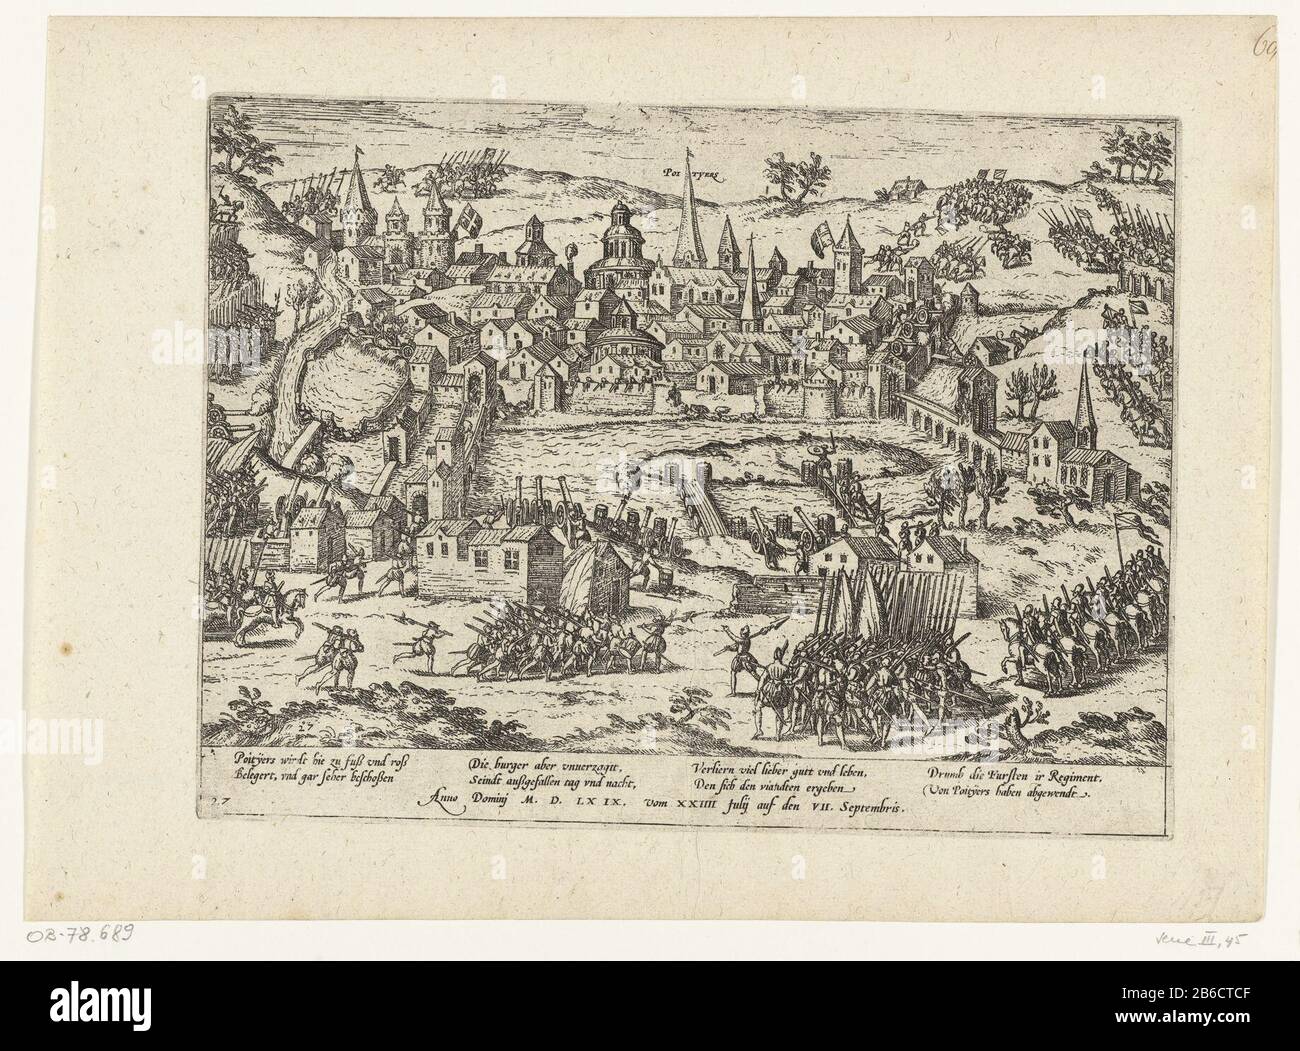 Siege of Poitiers, 1569 Series 3 French Wars of Religion, 1559-1573 (series title) Siege of Poitiers, 1569Serie 3: French Wars of Religion, 1559-1573 (series title) Property Type: print history print Serial Number 45 / 469Objectnummer: RP-P-OB-78.689Catalogusreferentie: FMH 413-45Hellwig 46New Hollstein Dutch B43 -3 (4) Description: Siege of Poitiers, July 24 to september 7, 1569. View of the besieged city. With signature of 8 lines in German. Numbered 27. Leaf comes from an album that is disassembled. Upper right numbered (in pen) 68. Manufacturer : printmaker French High Mountain To print by Stock Photo